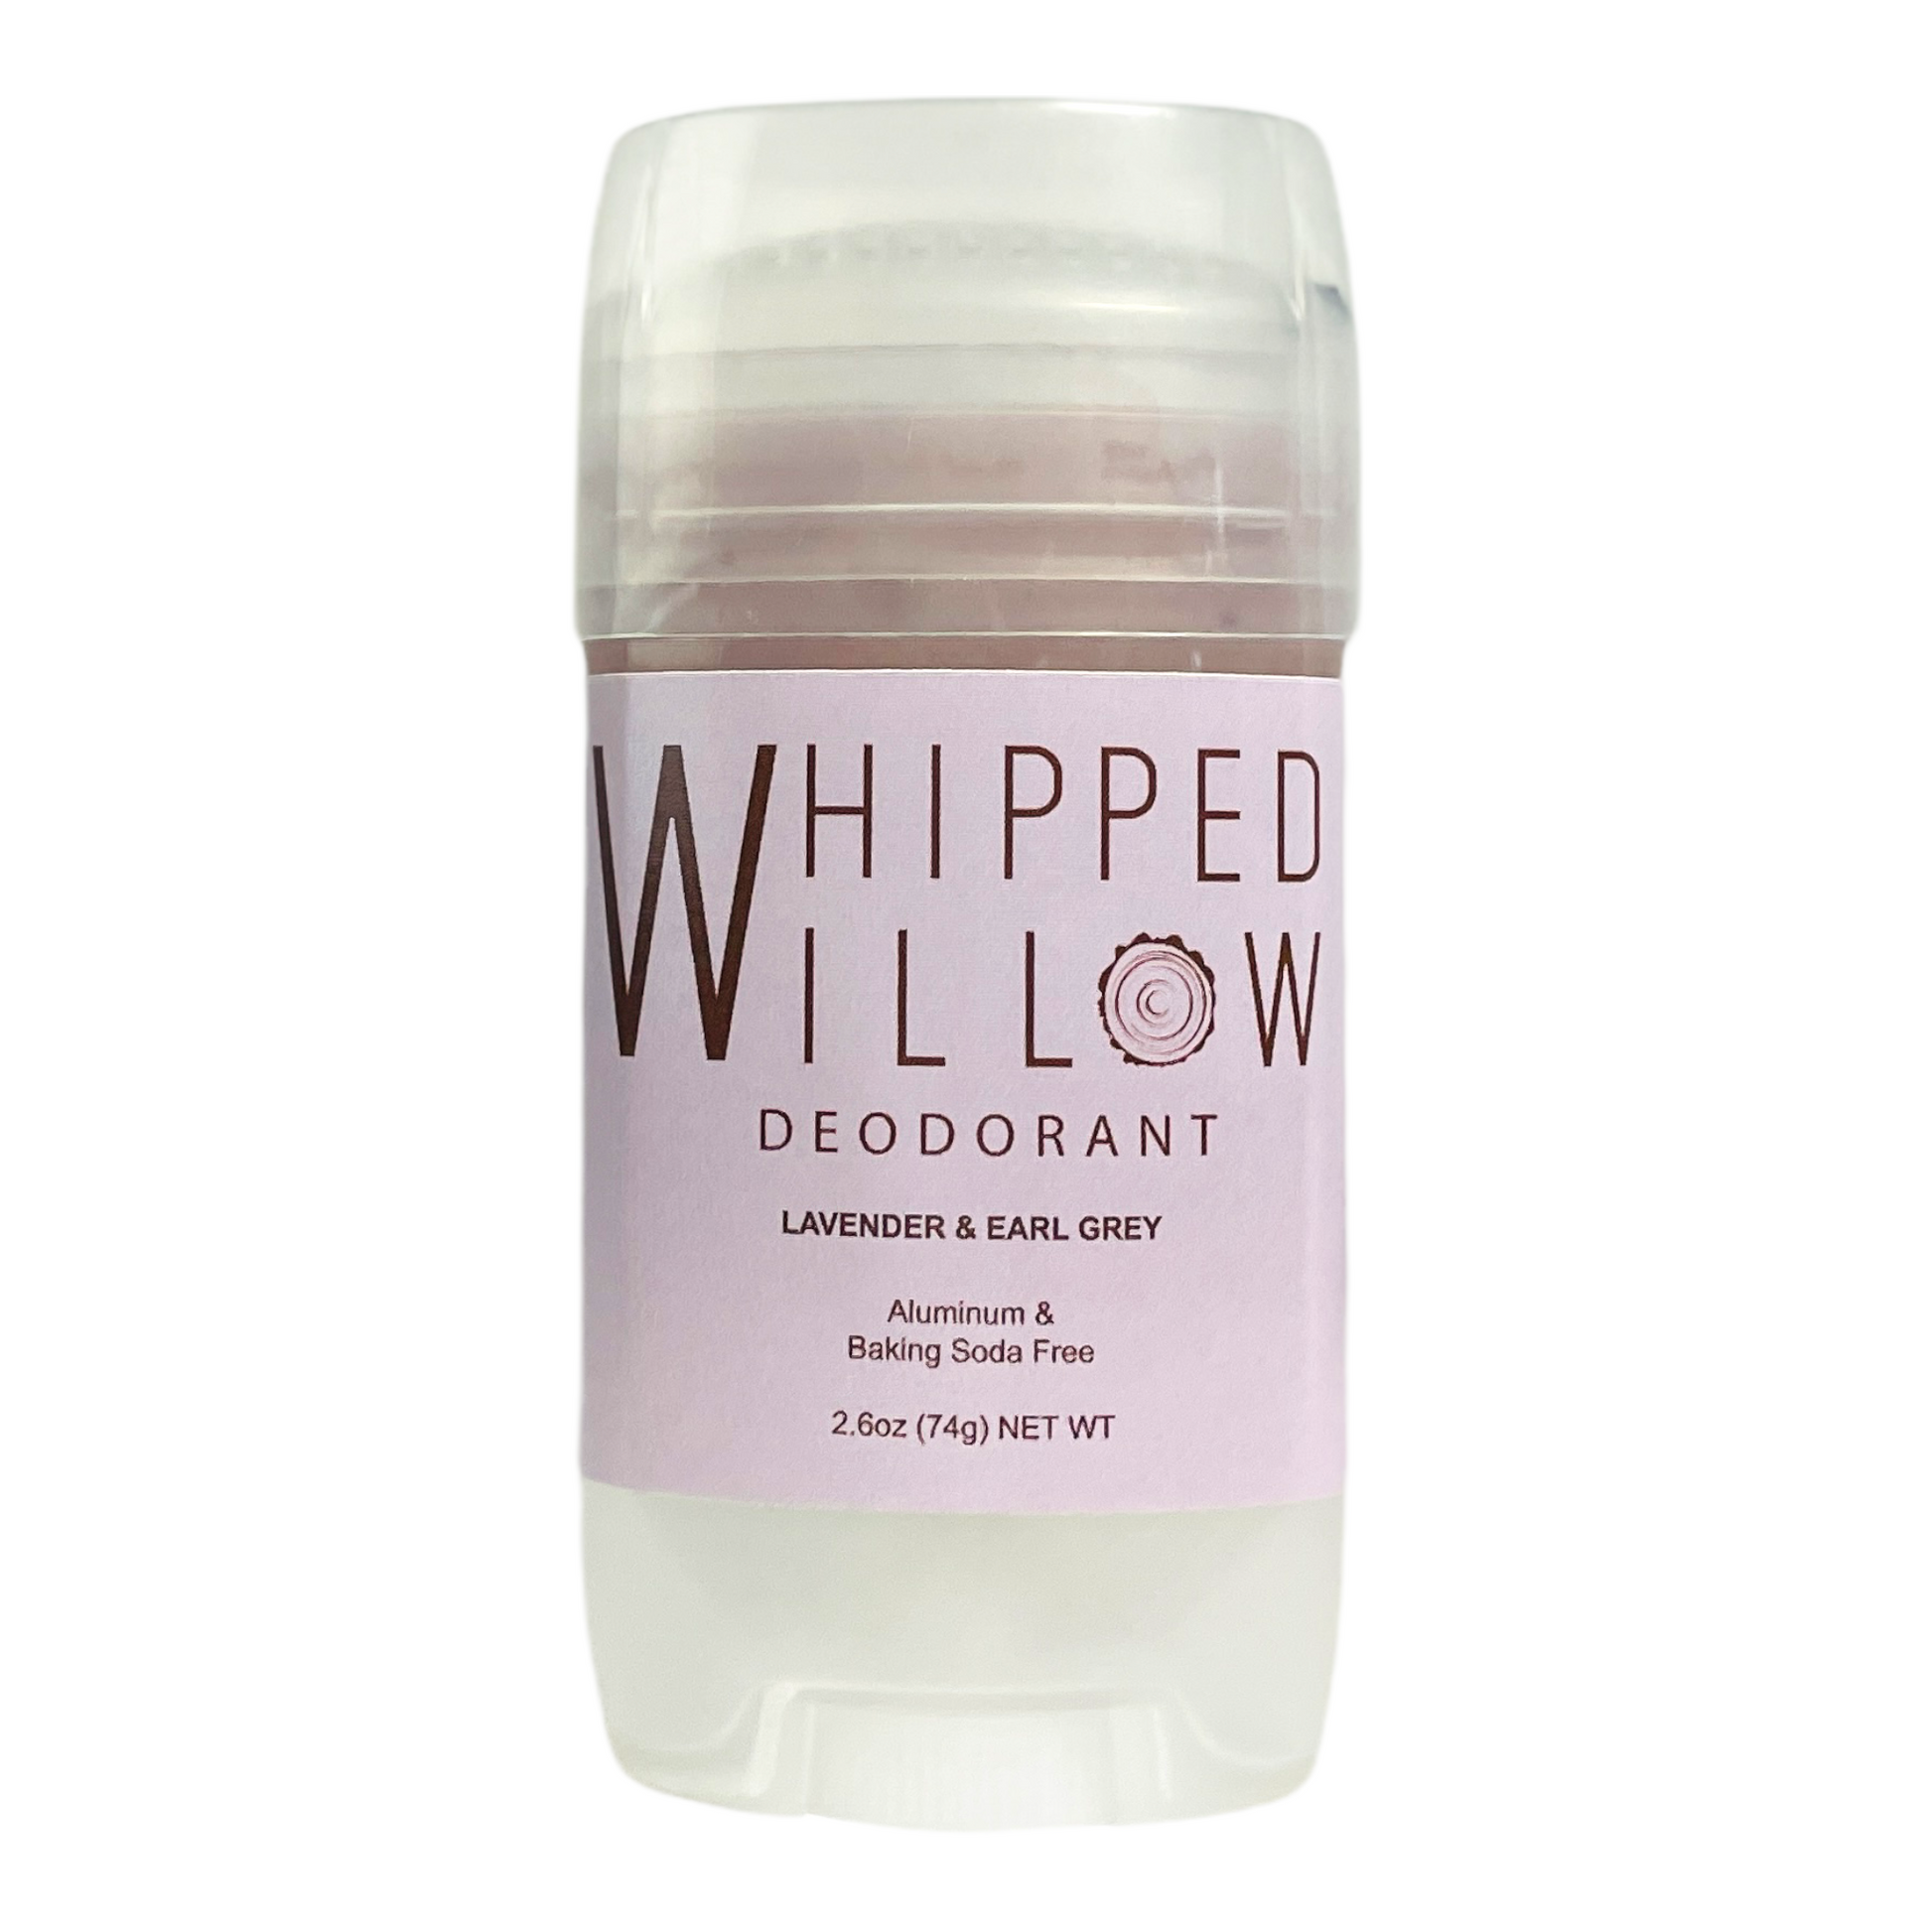 Whipped Willow baking soda free lavender deodorant